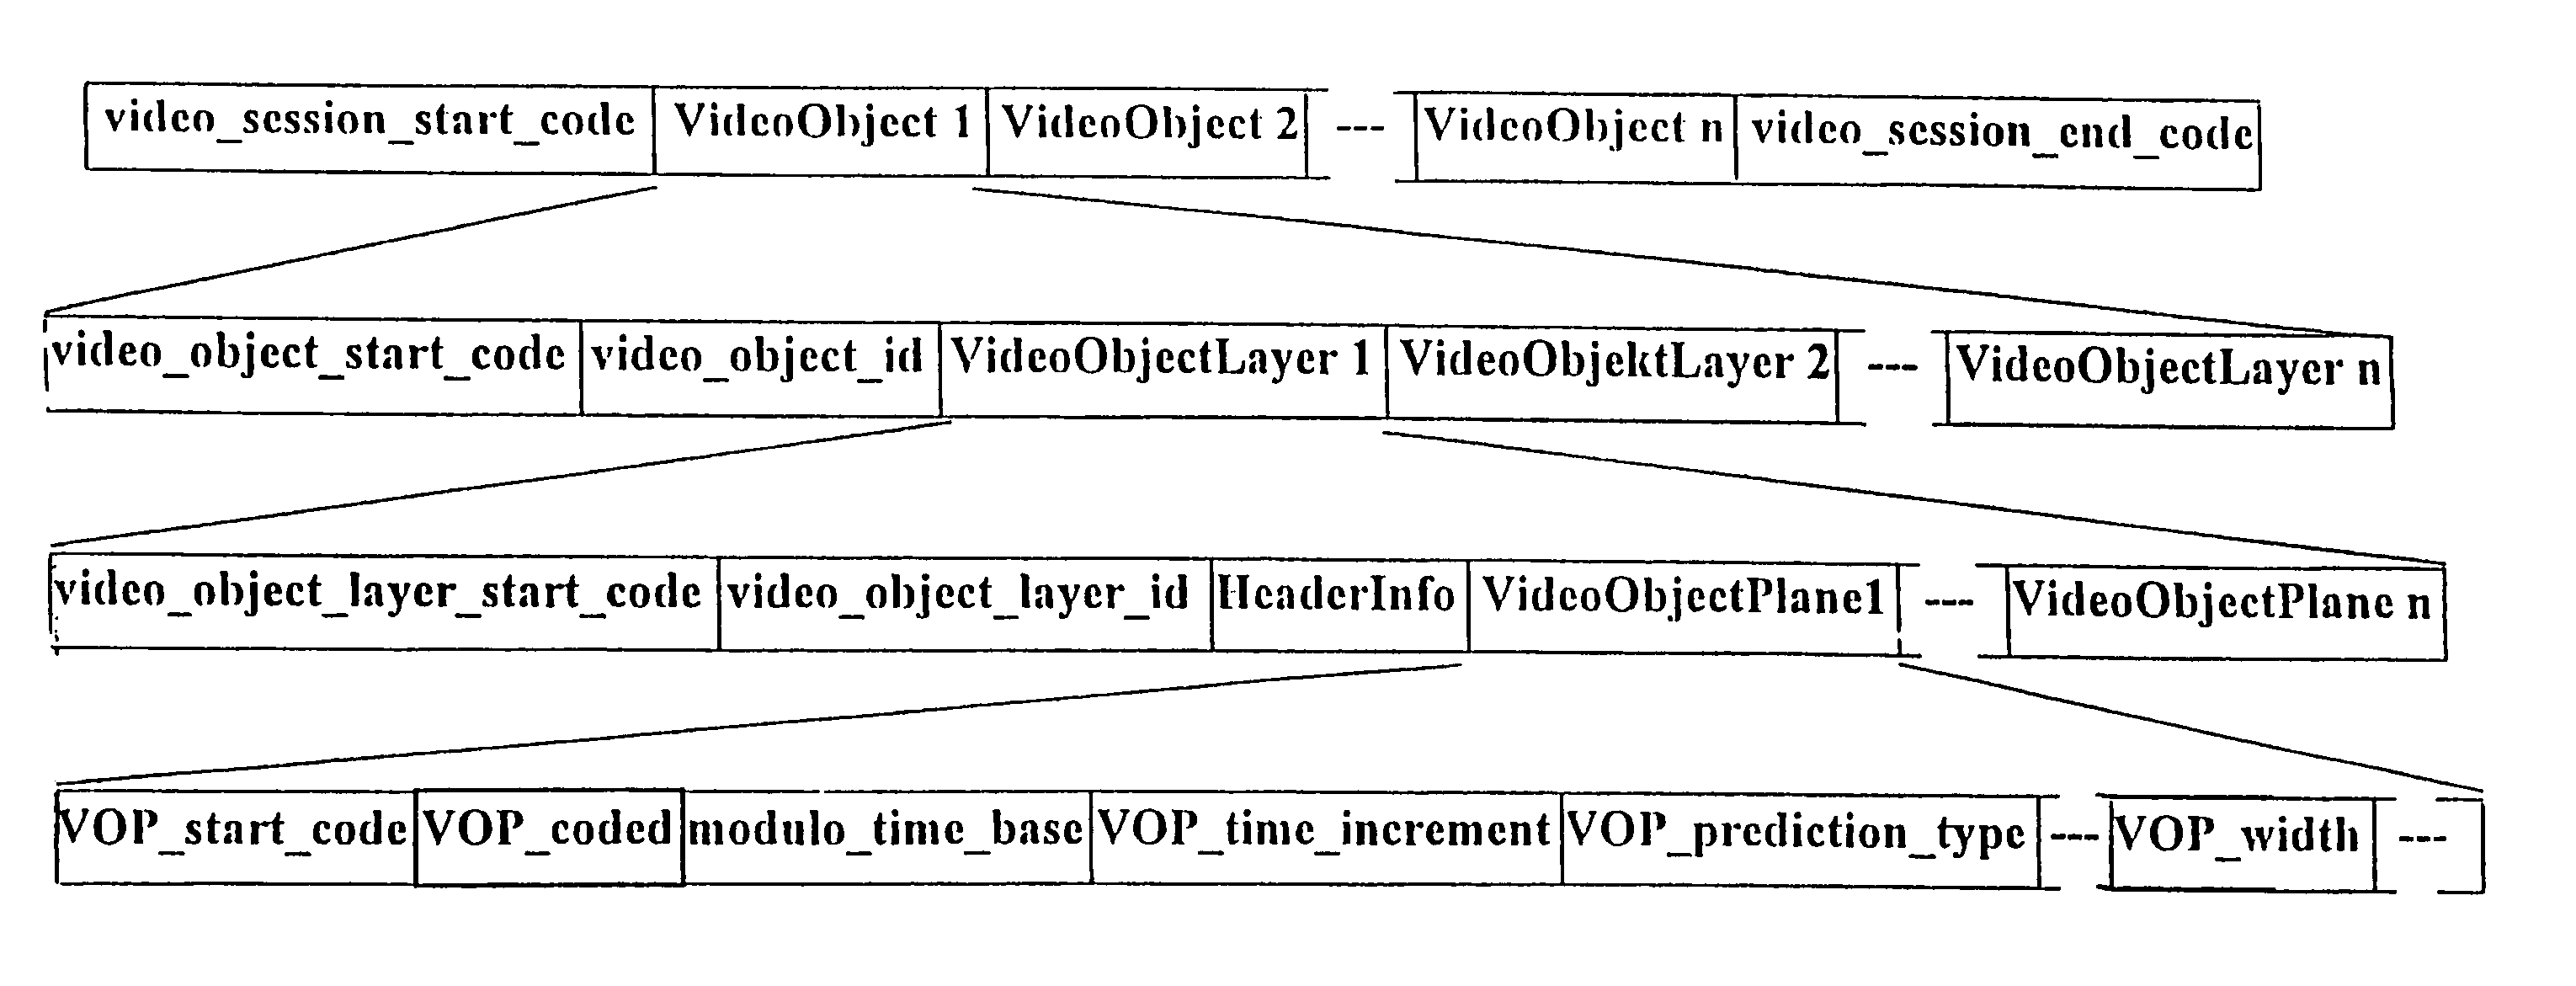 Method for formatting a data flow by coding based on the sequence objects of animated images